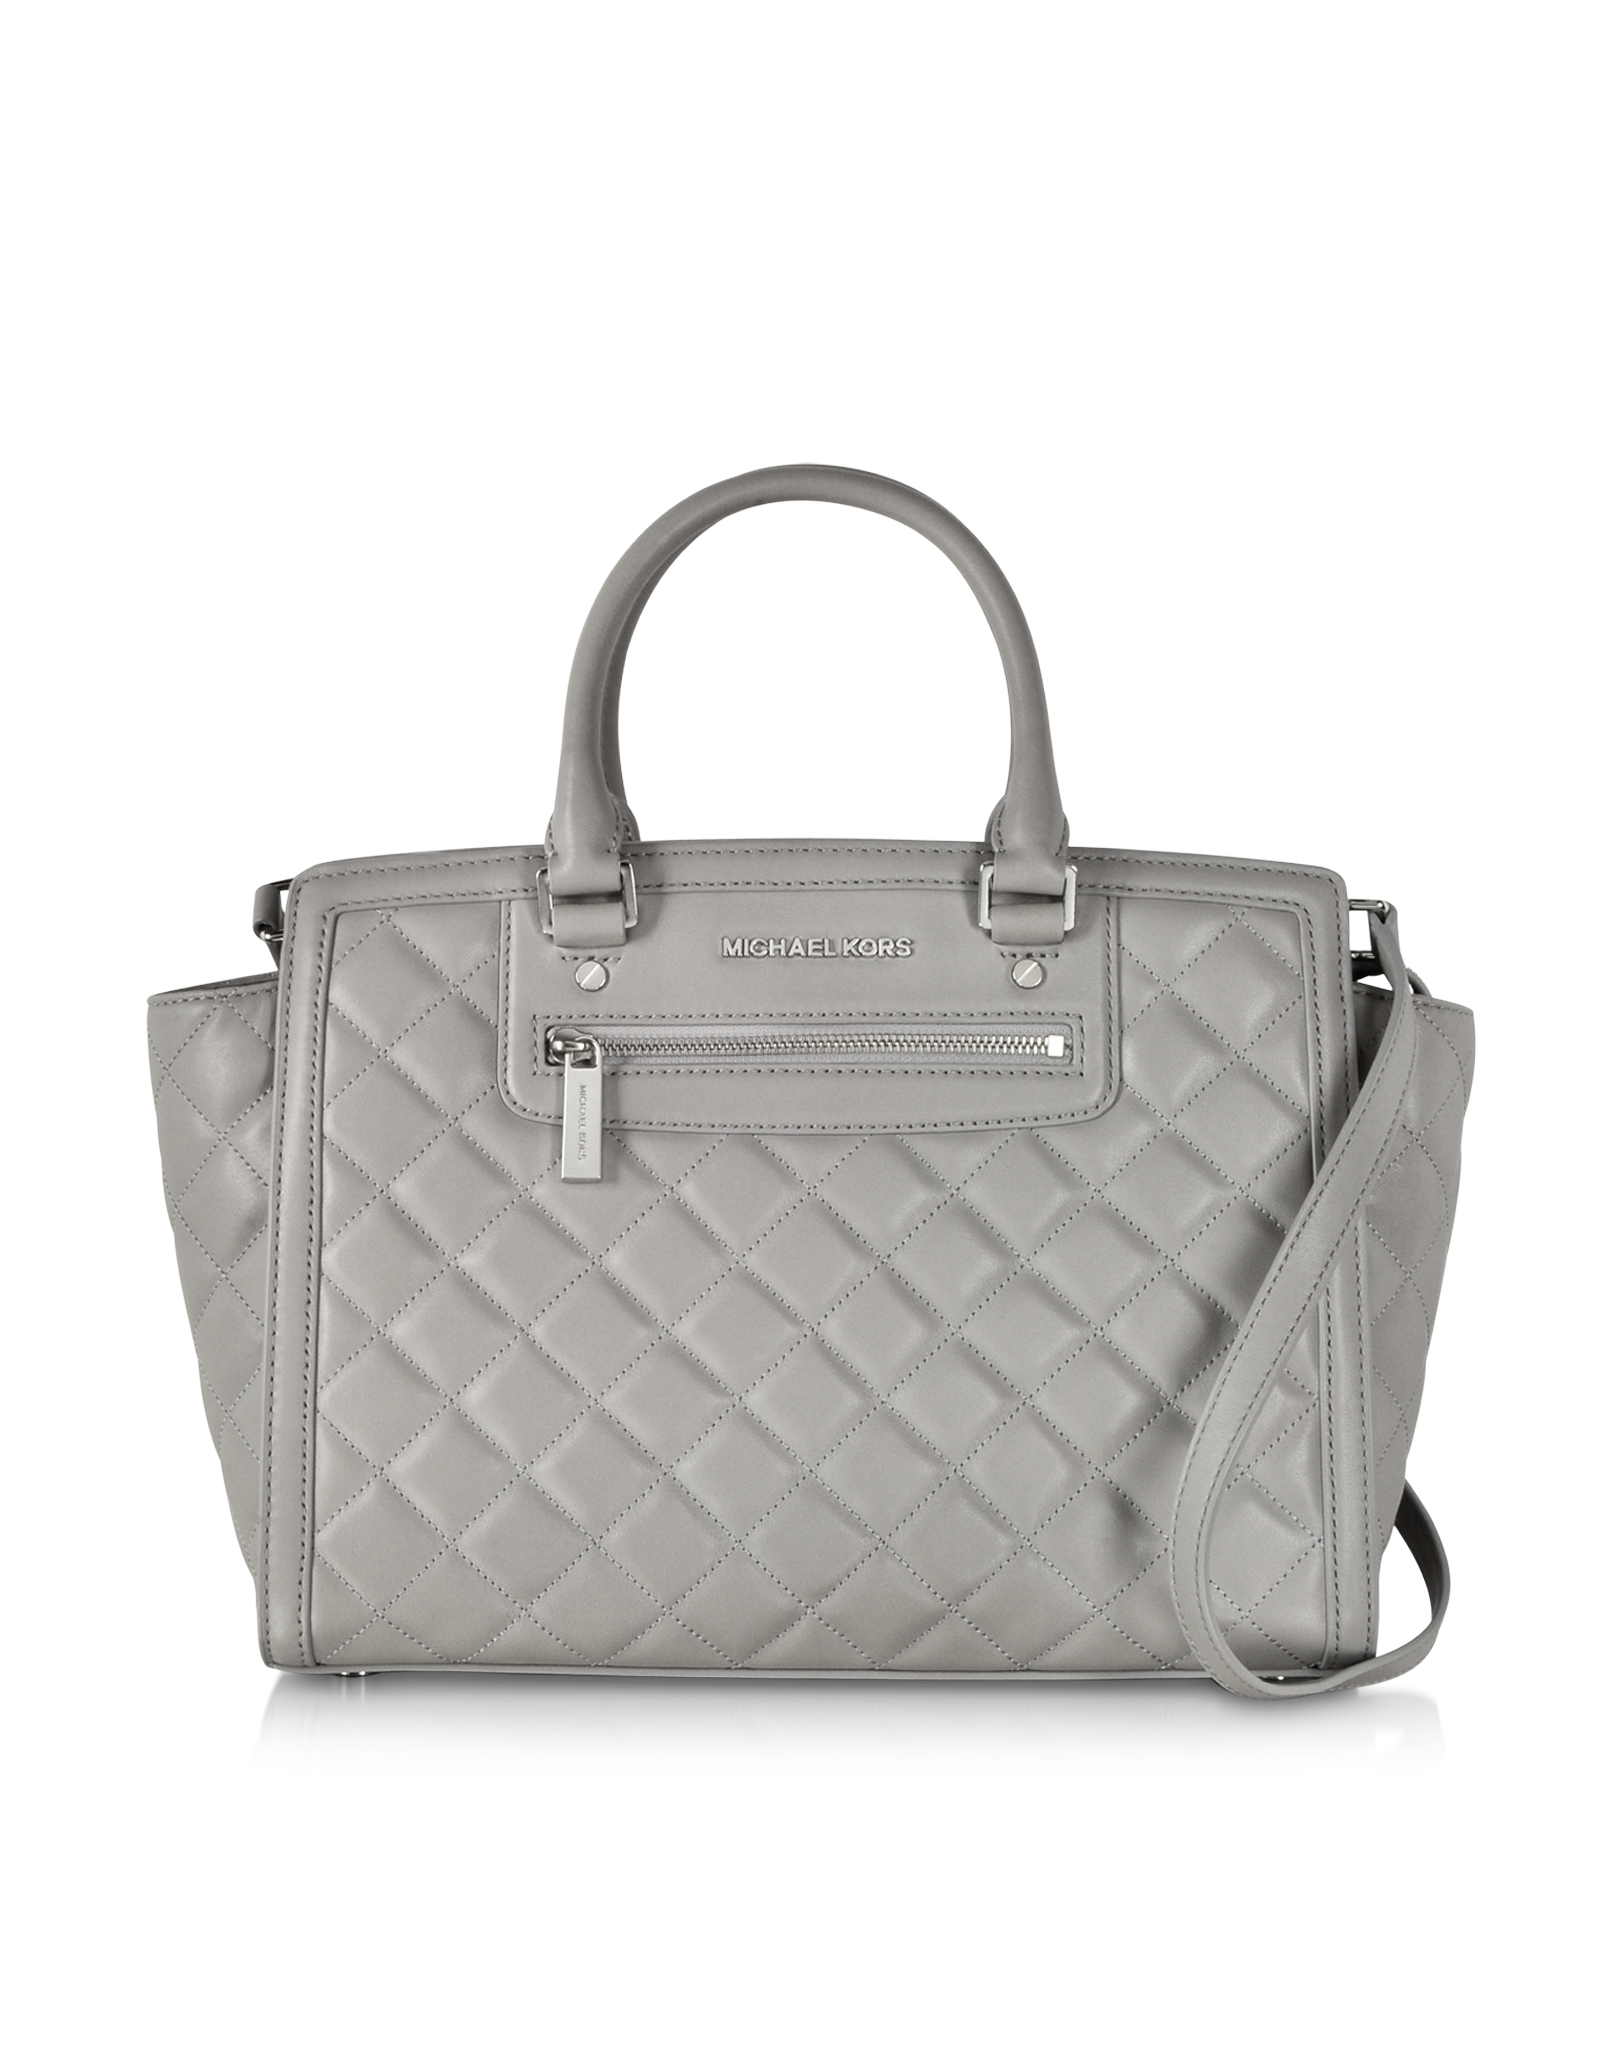 Michael kors Selma Large Pearl Grey Quilted Leather Satchel in Gray | Lyst